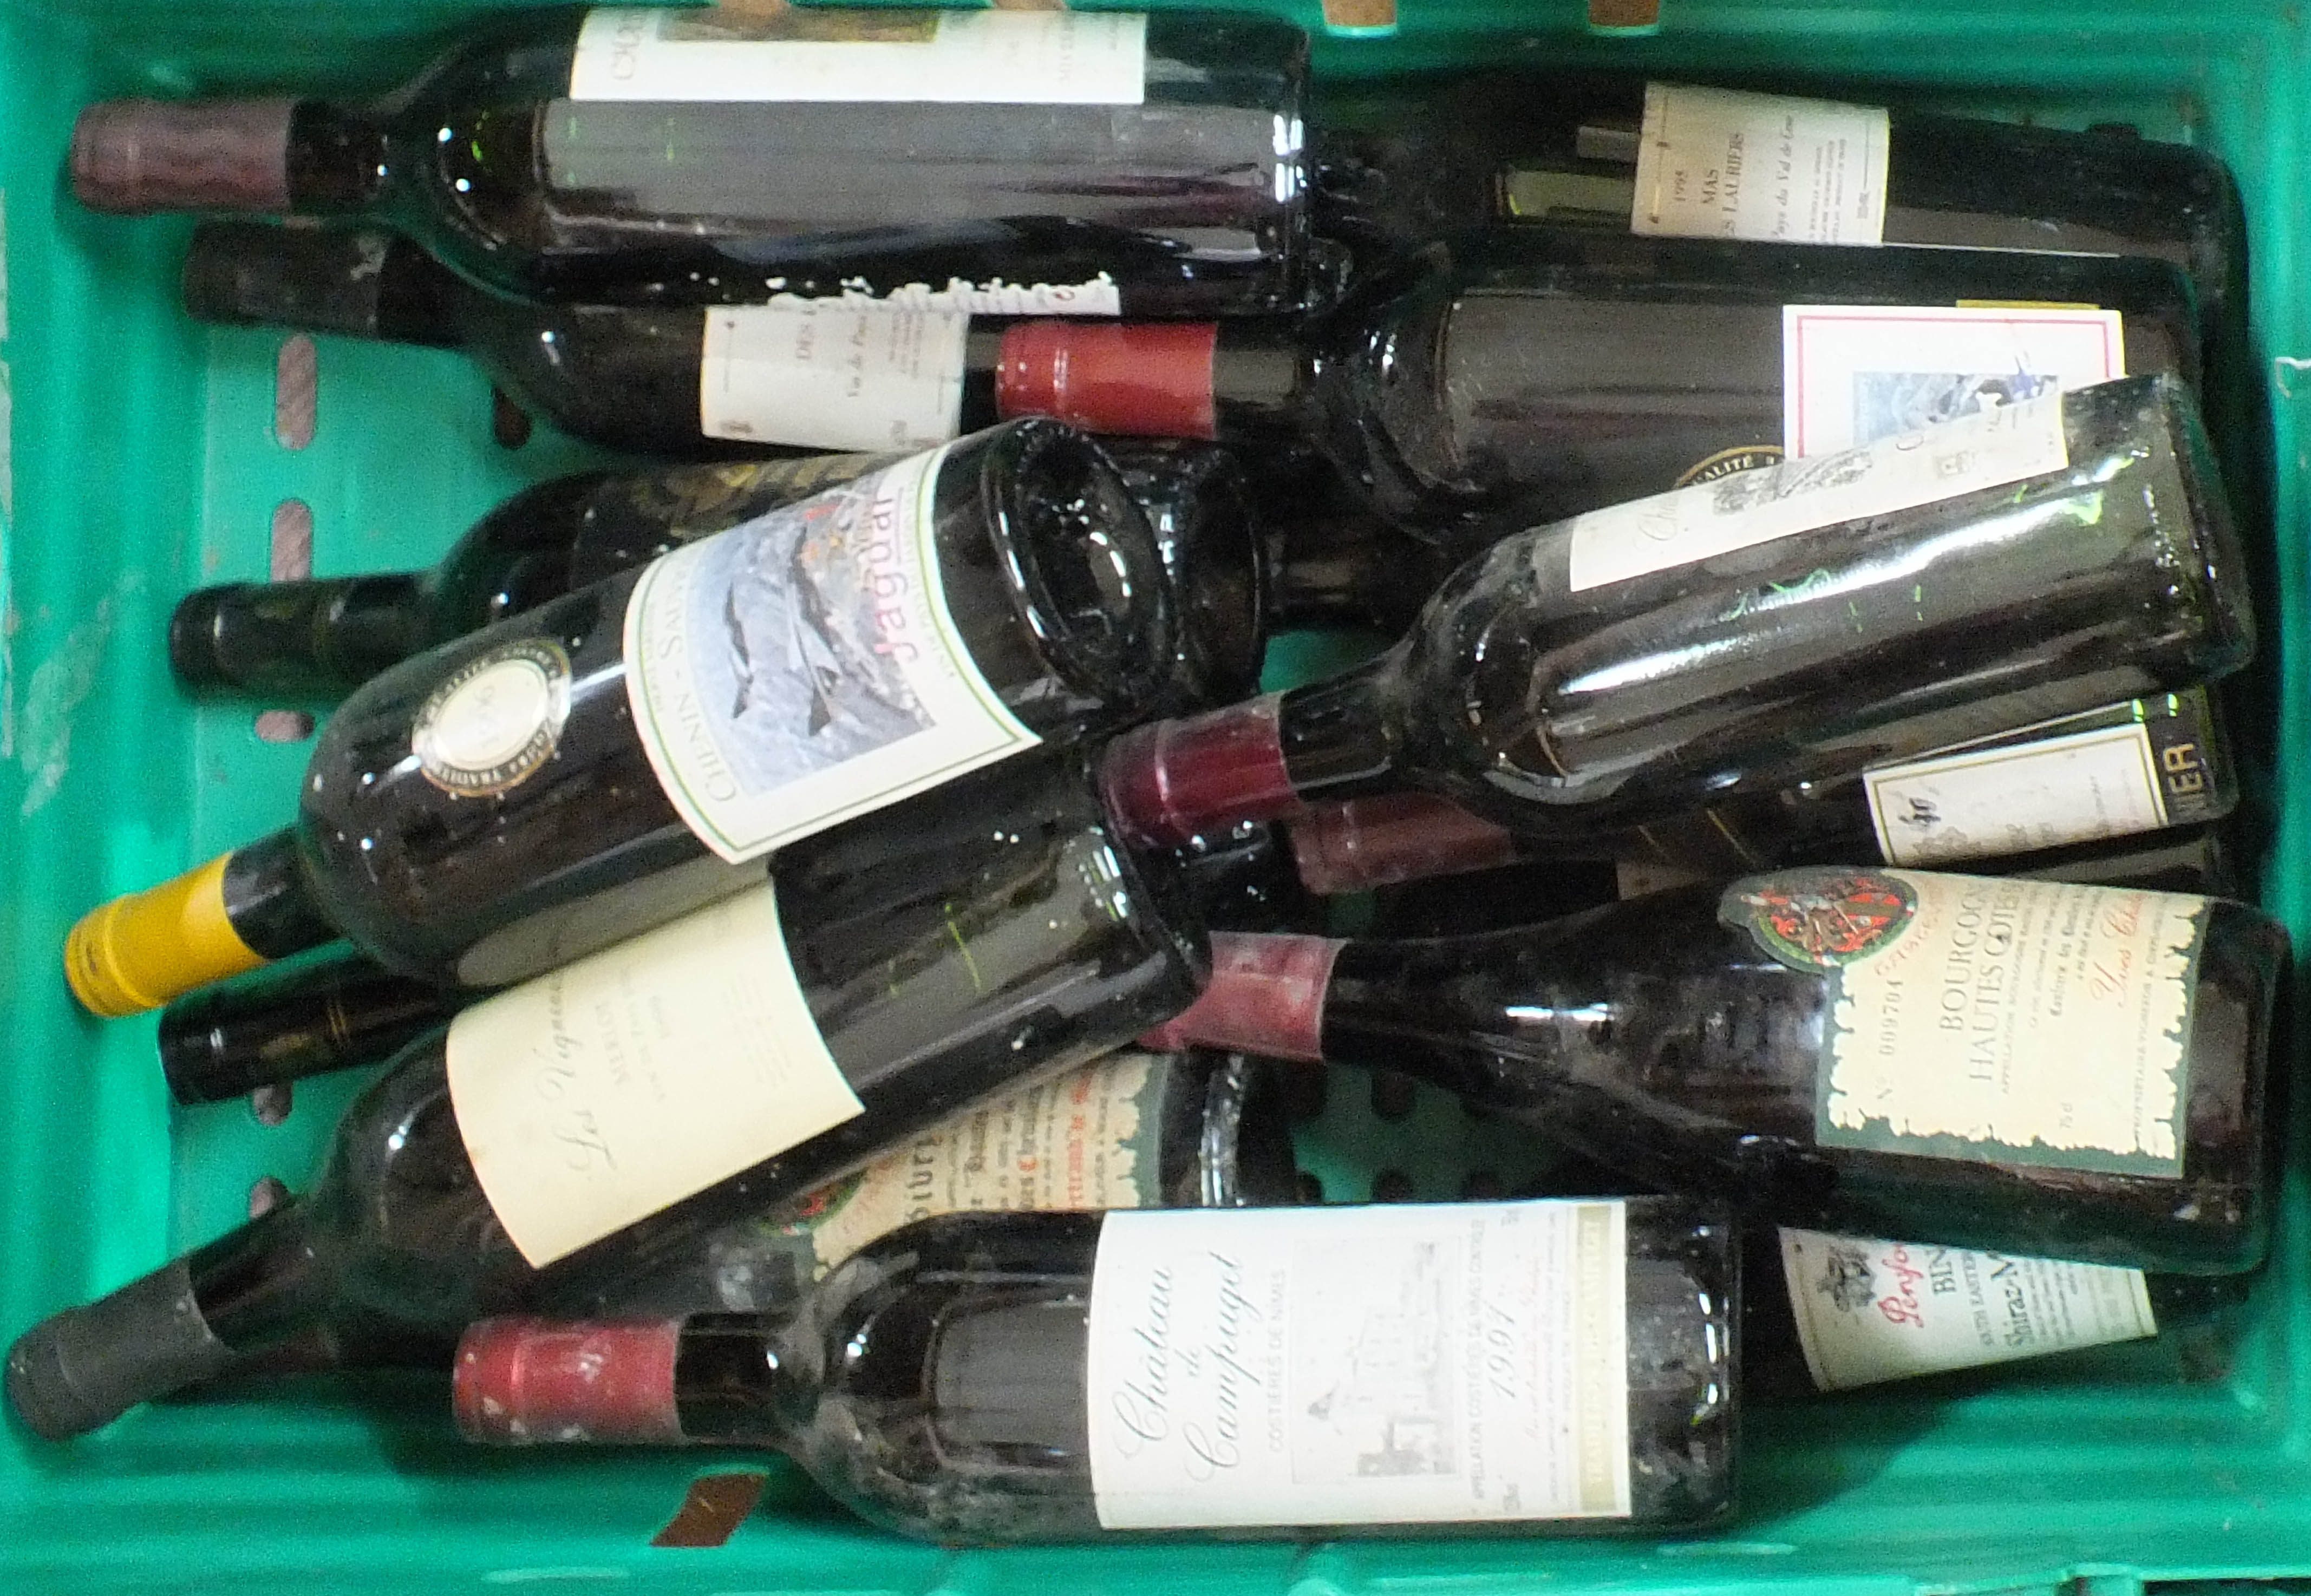 Wines to include Penfolds 1992 Bin 2 shiraz Mourvedre, 1995 Mas des Laurieds,